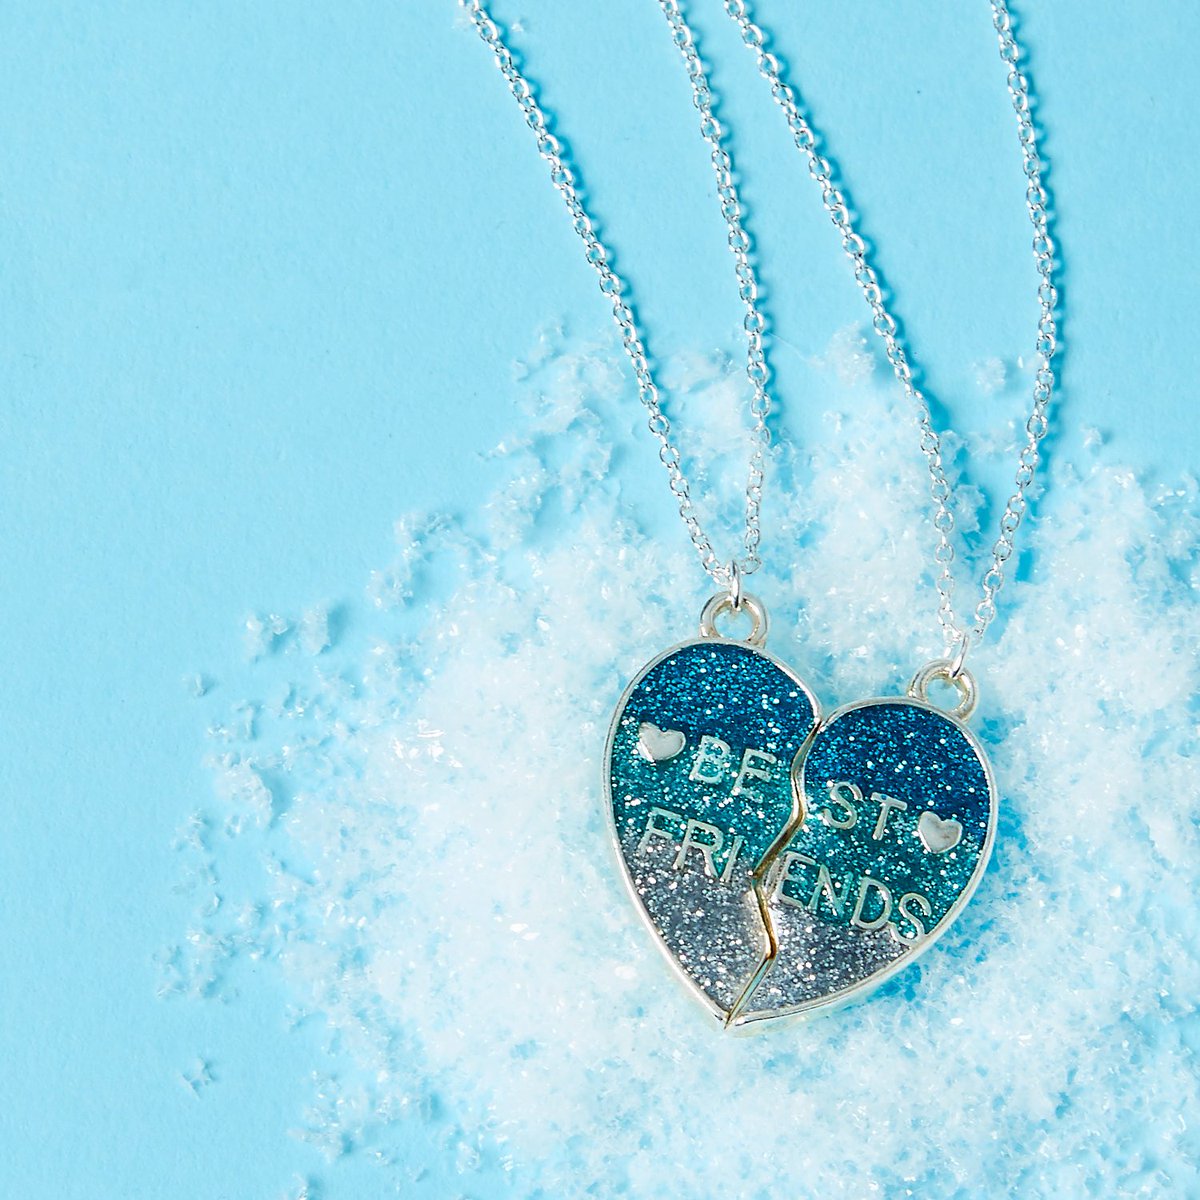 Claire's on Twitter: "Share this best necklace with bestie 💙💎❄ Tag a friend who would love this below! https://t.co/x9yRwJV0DV https://t.co/nM3ISn2AhQ" / Twitter